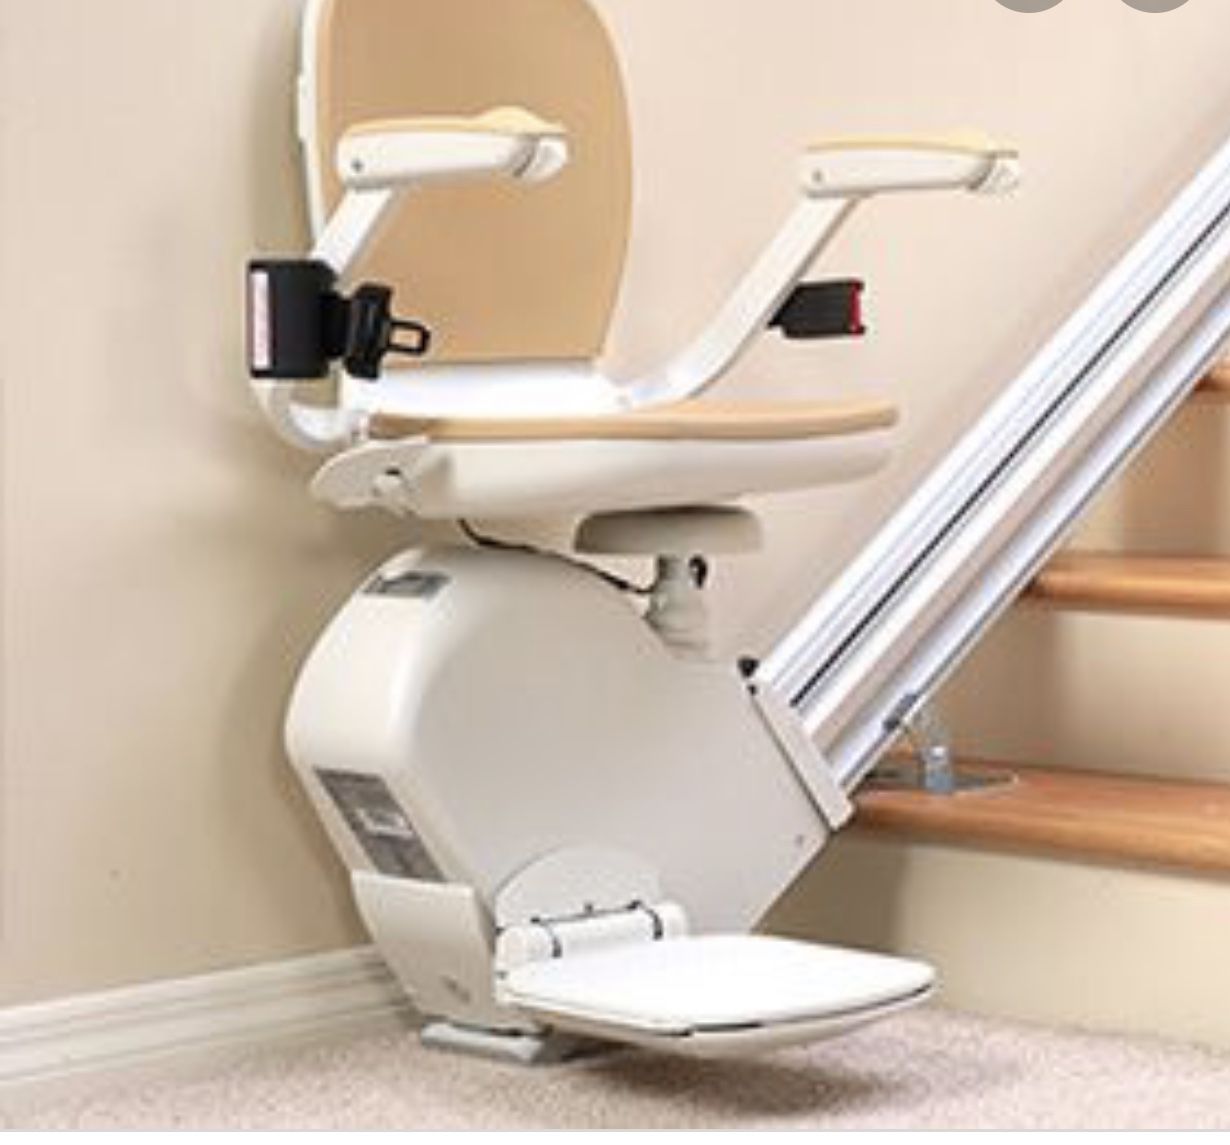 Acorn 350 stairlifts